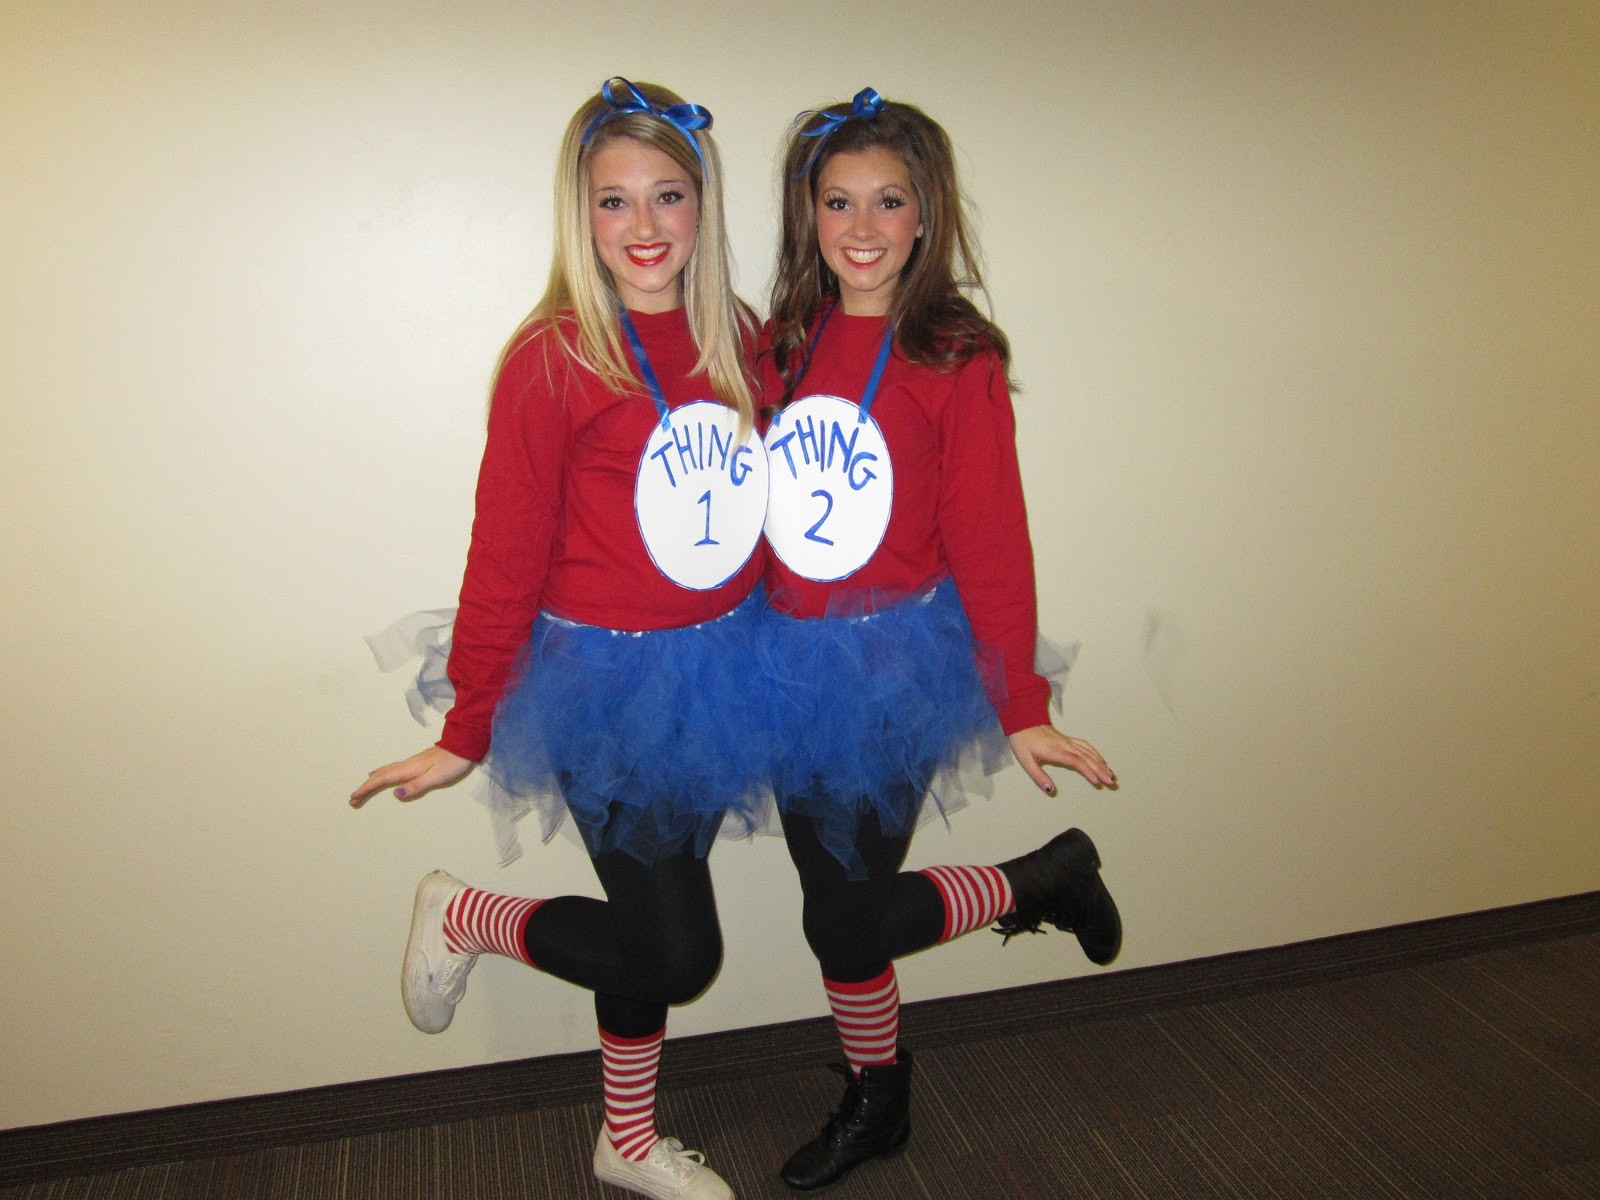 Thing 1 Costume DIY
 Halloween 2014 Costumes for Two – The Chic Daily